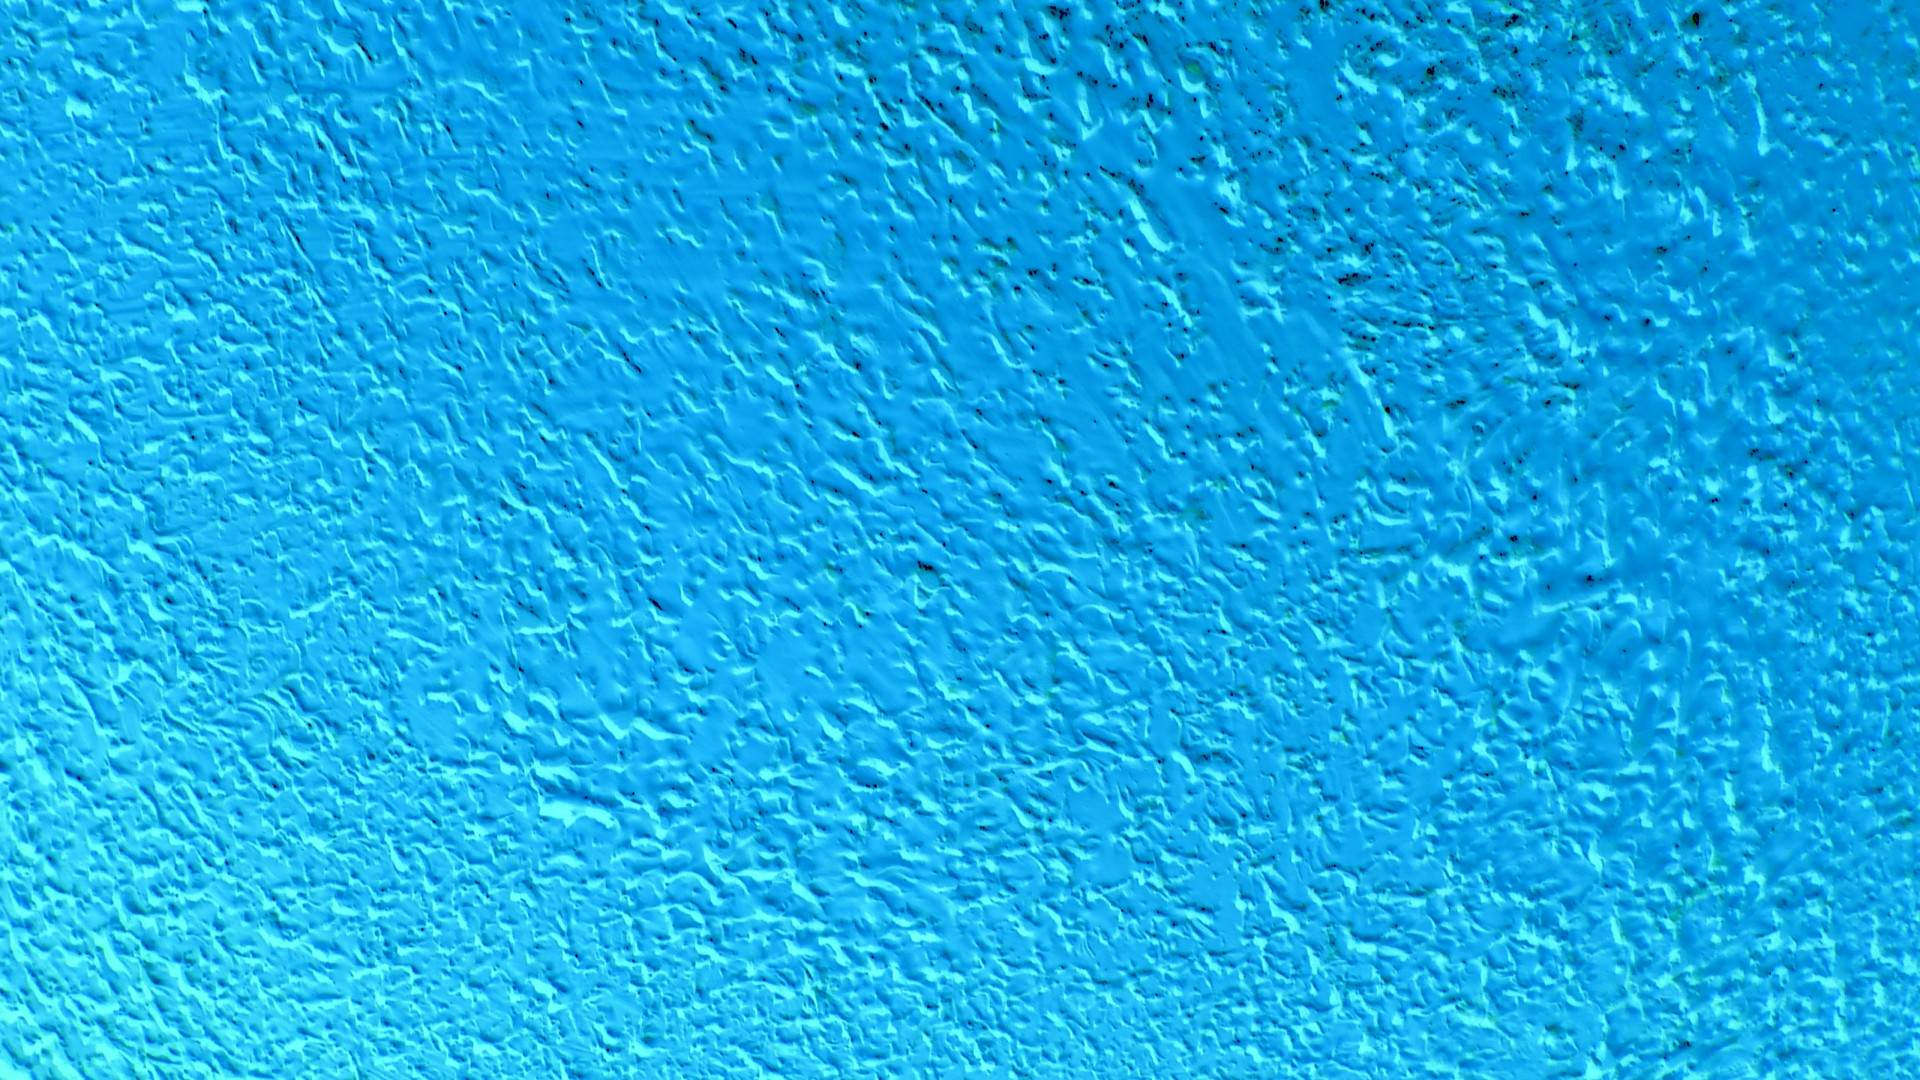 Blue Textured Hd Picture image